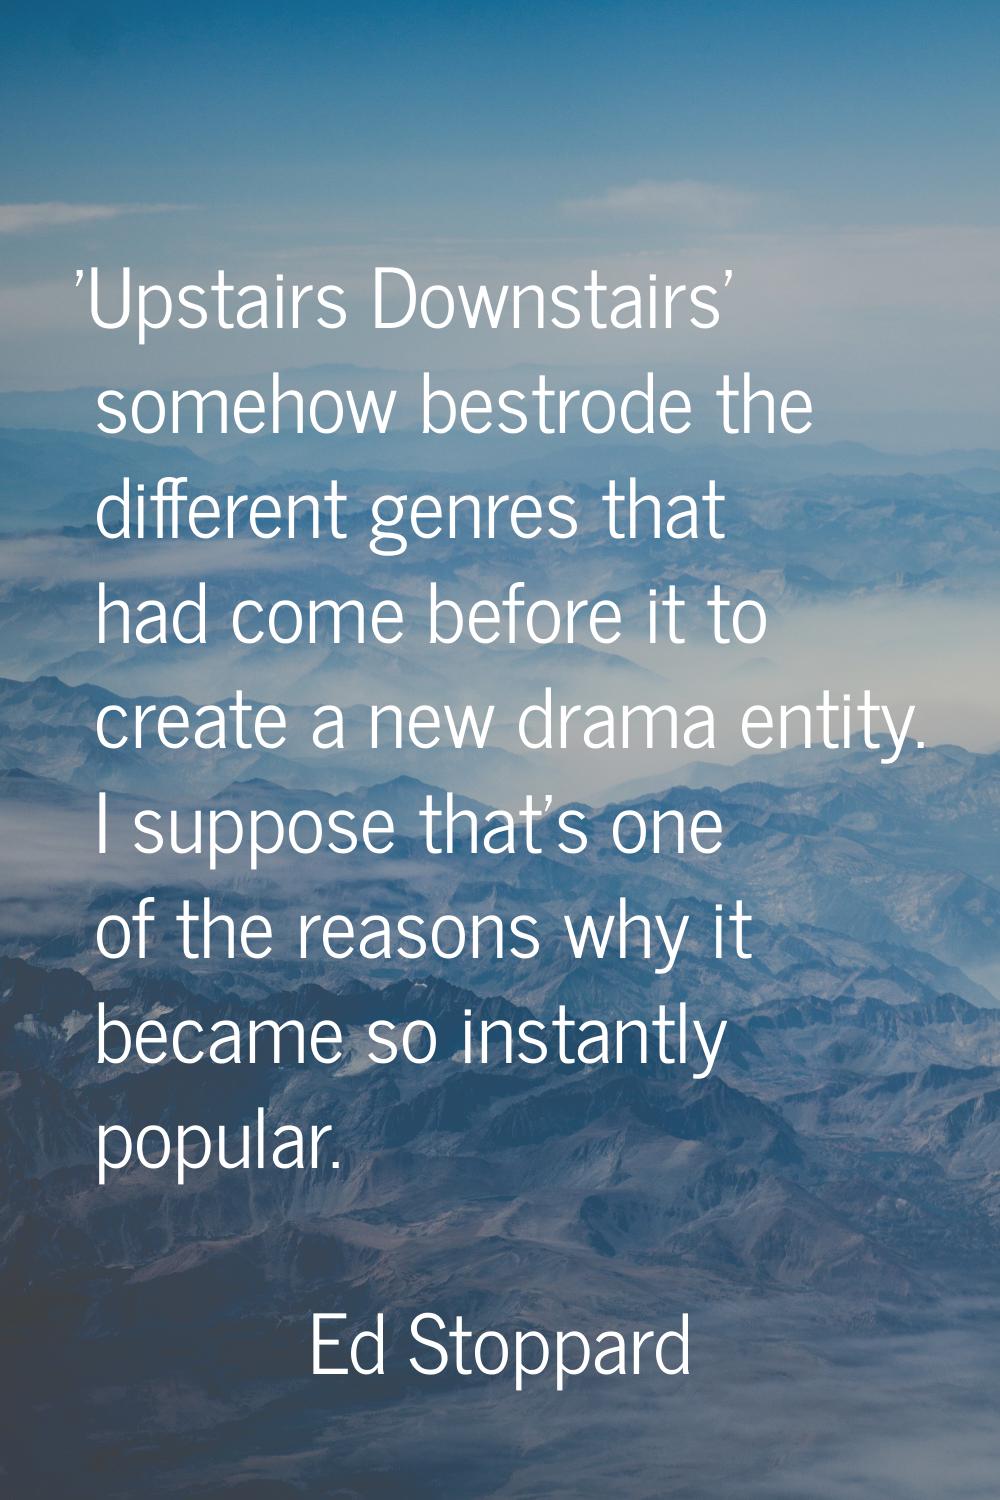 'Upstairs Downstairs' somehow bestrode the different genres that had come before it to create a new